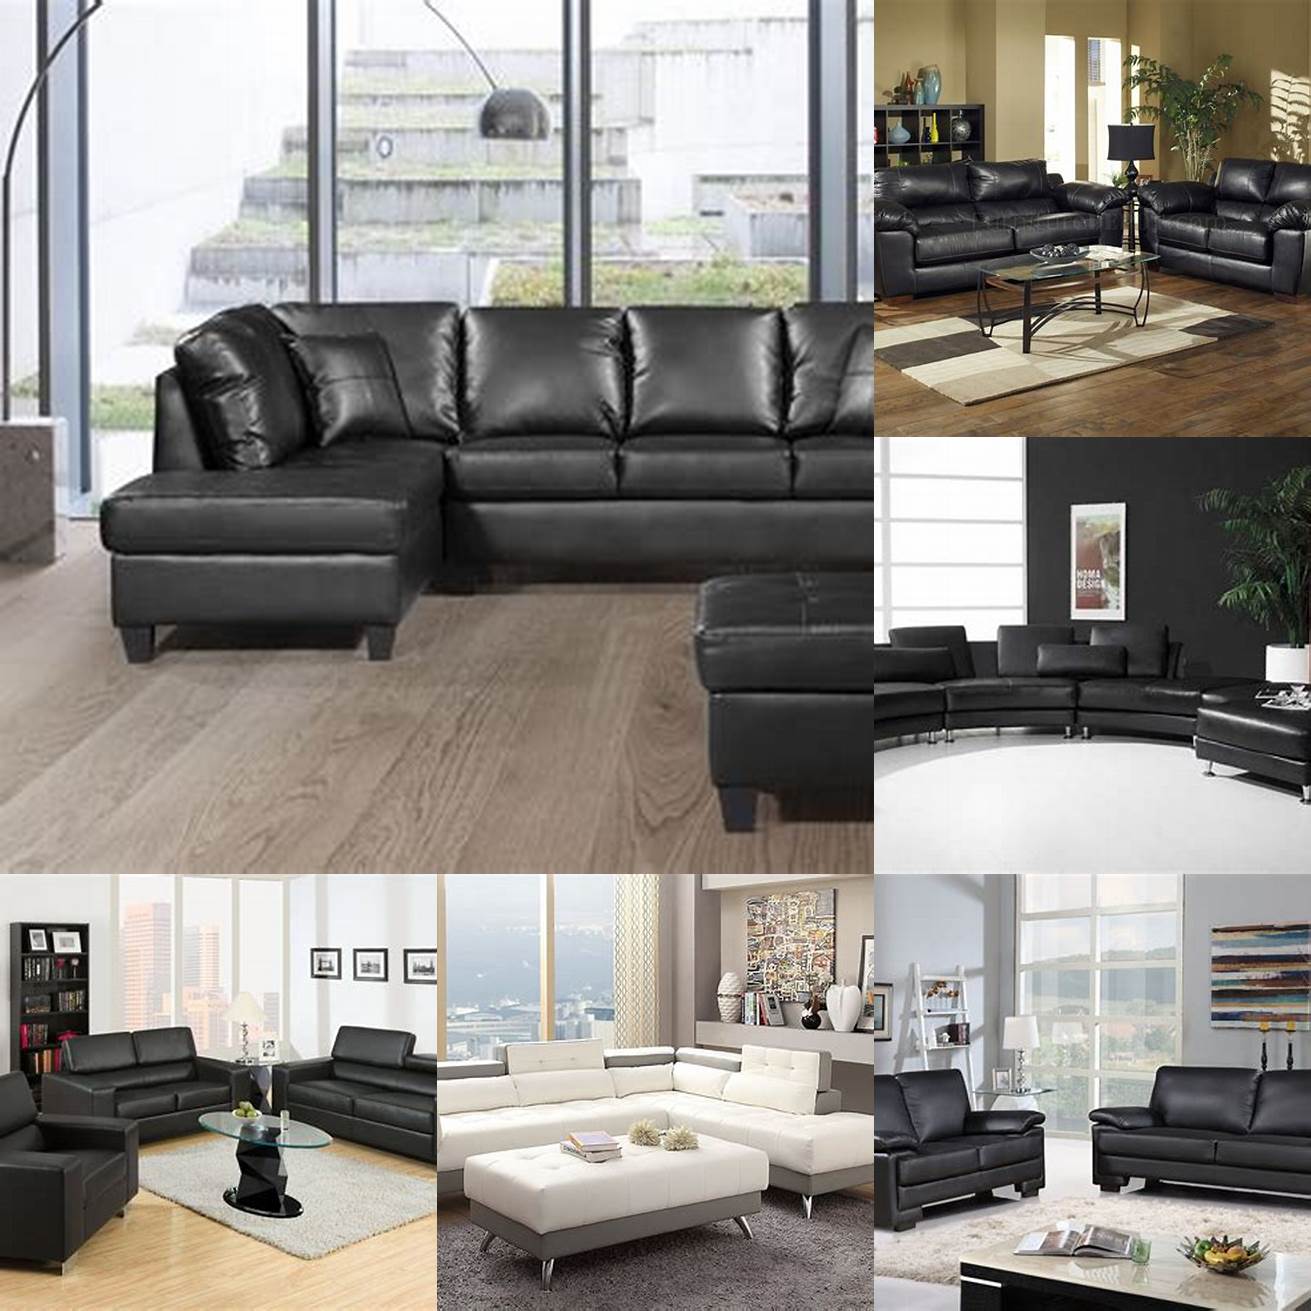 Image 3 A bonded leather sofa in a modern setting